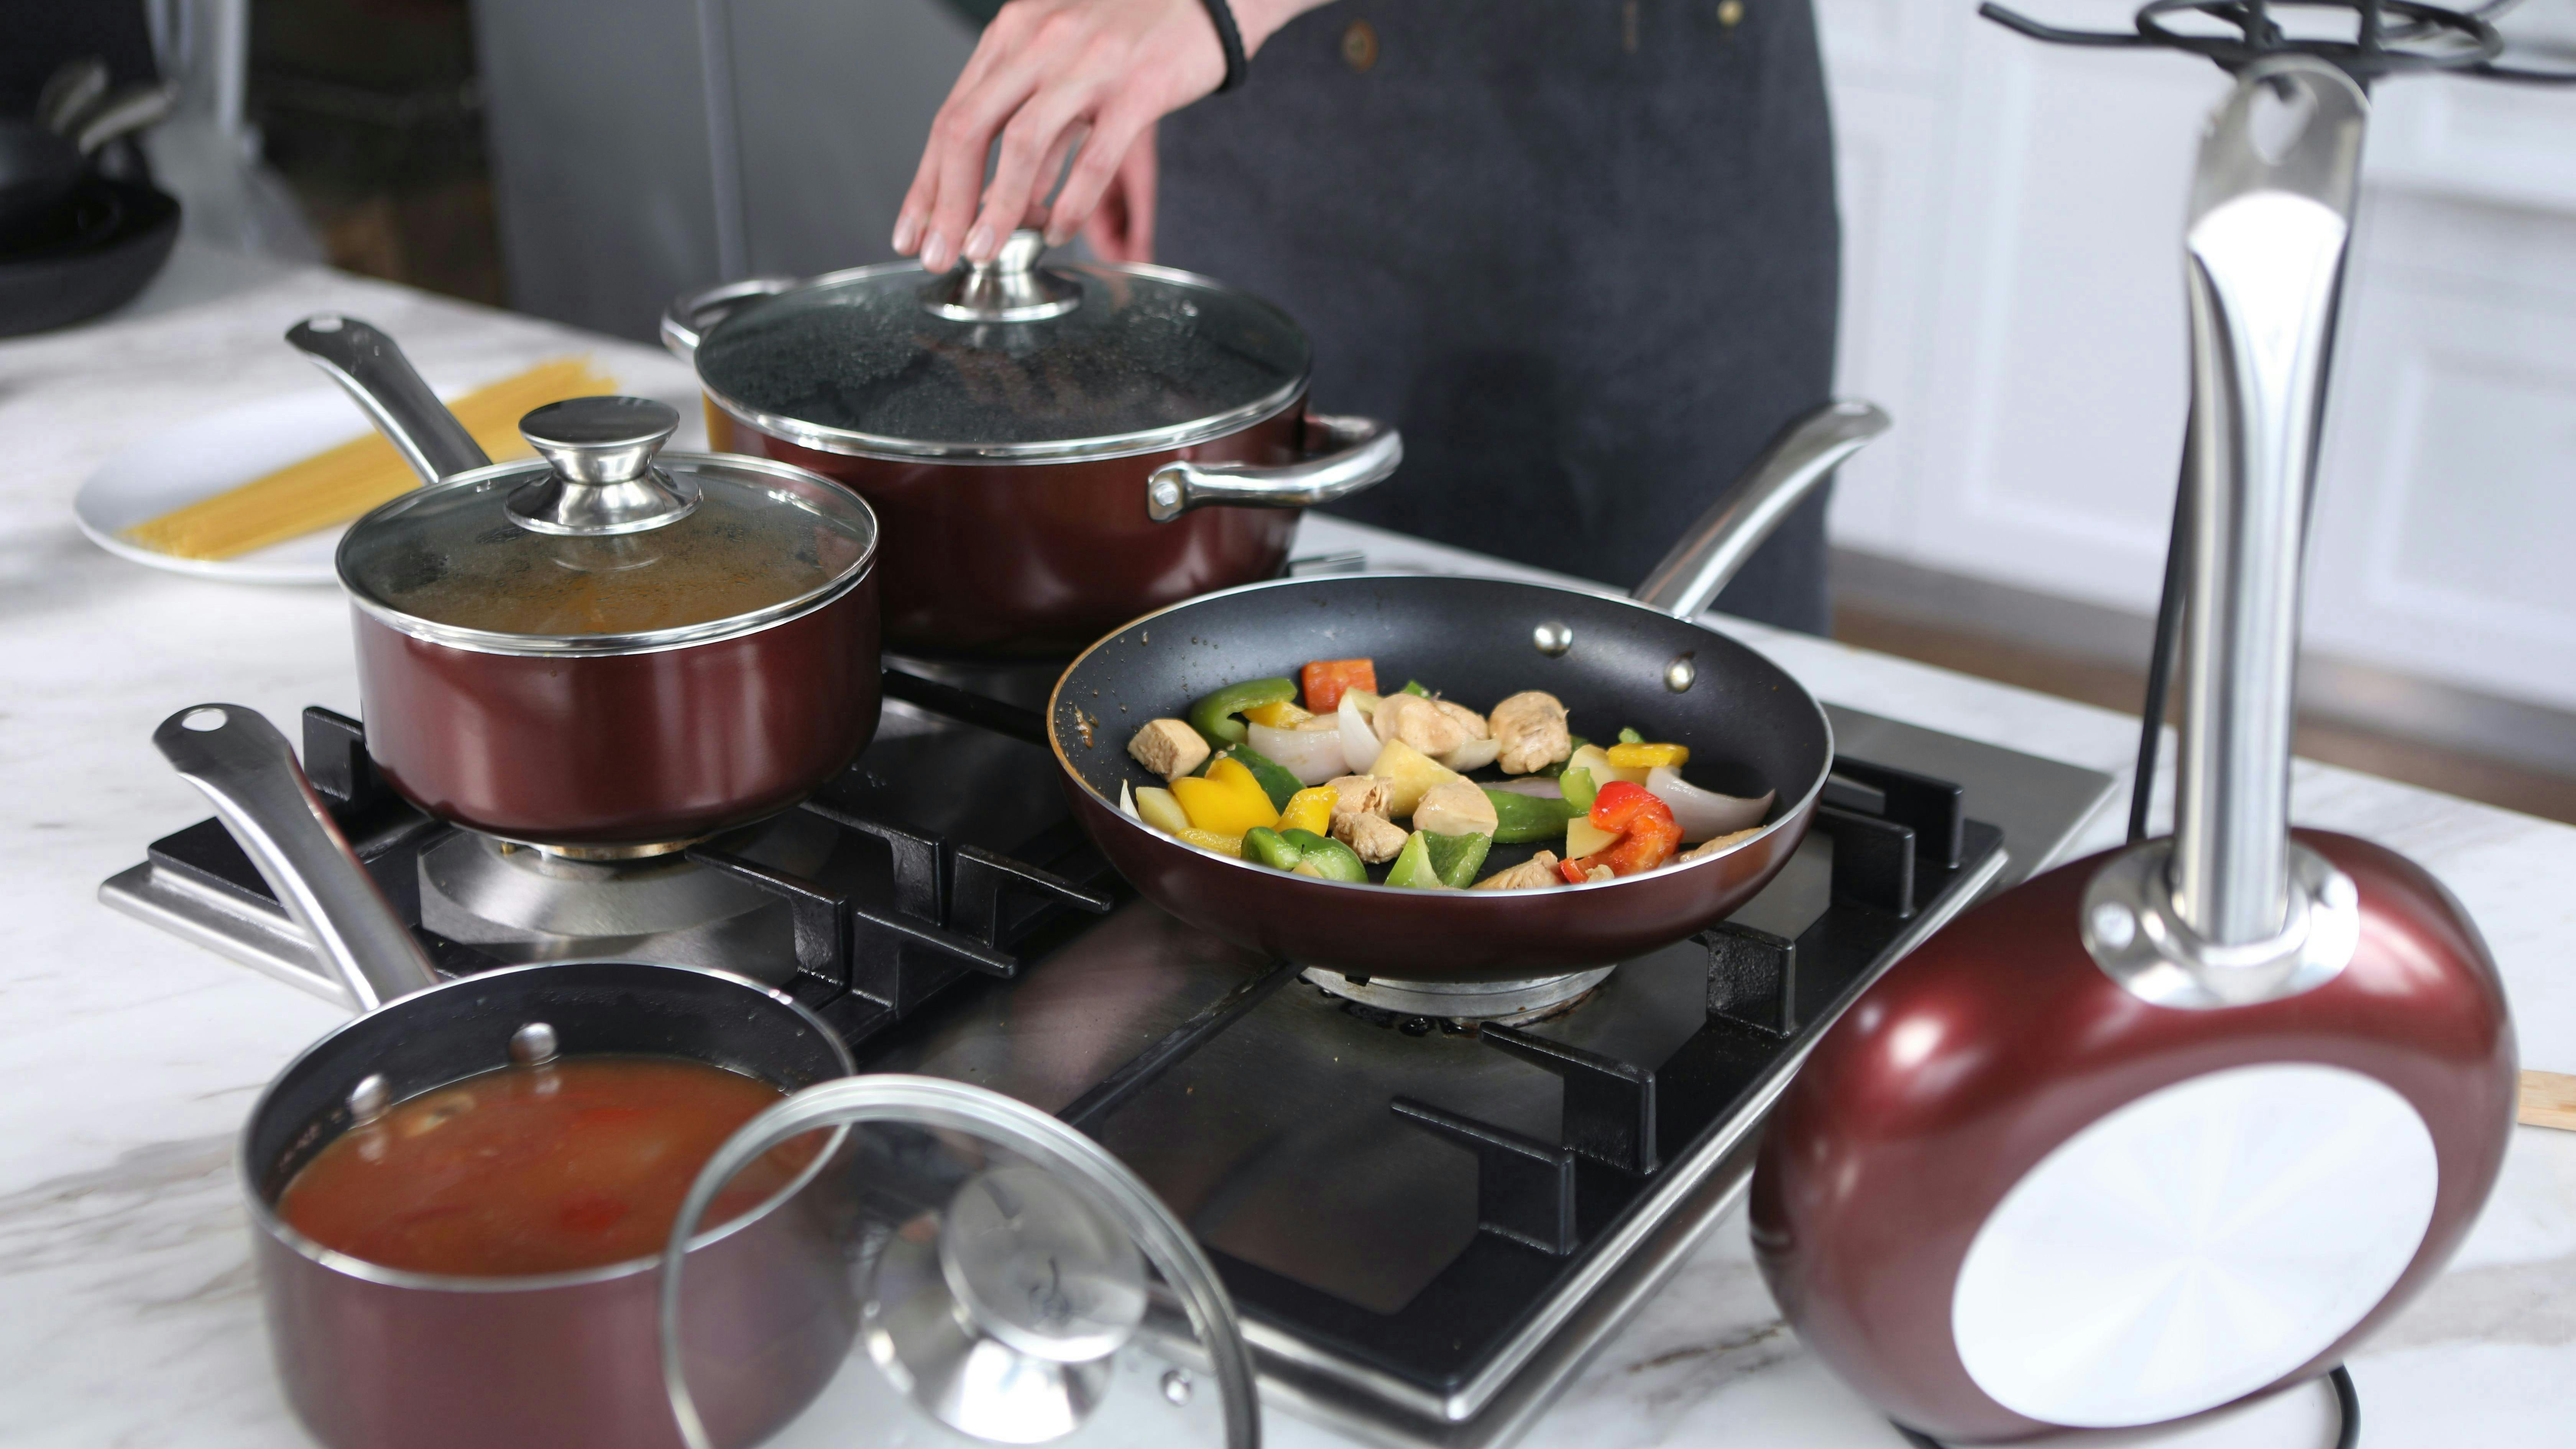 Cookware on stovetop. One pot has soup in it and one pan has vegetables in it. There is a hand taking the lid off of one of the large pots still on the stove. 